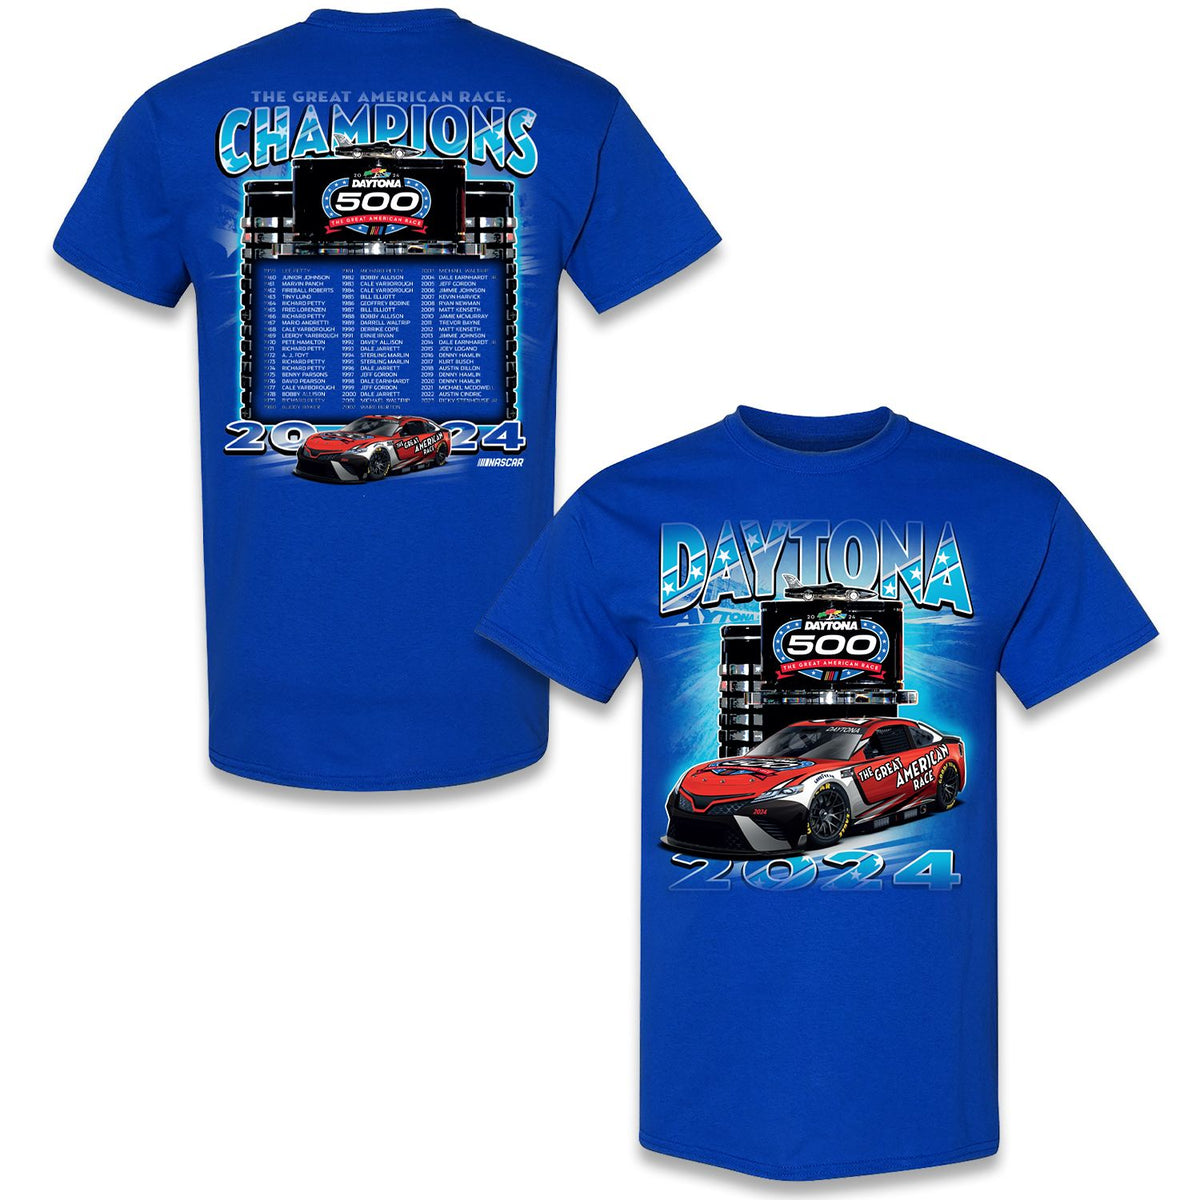 Shop NASCAR Merchandise, Guaranteed Lowest Prices at RacingUSA